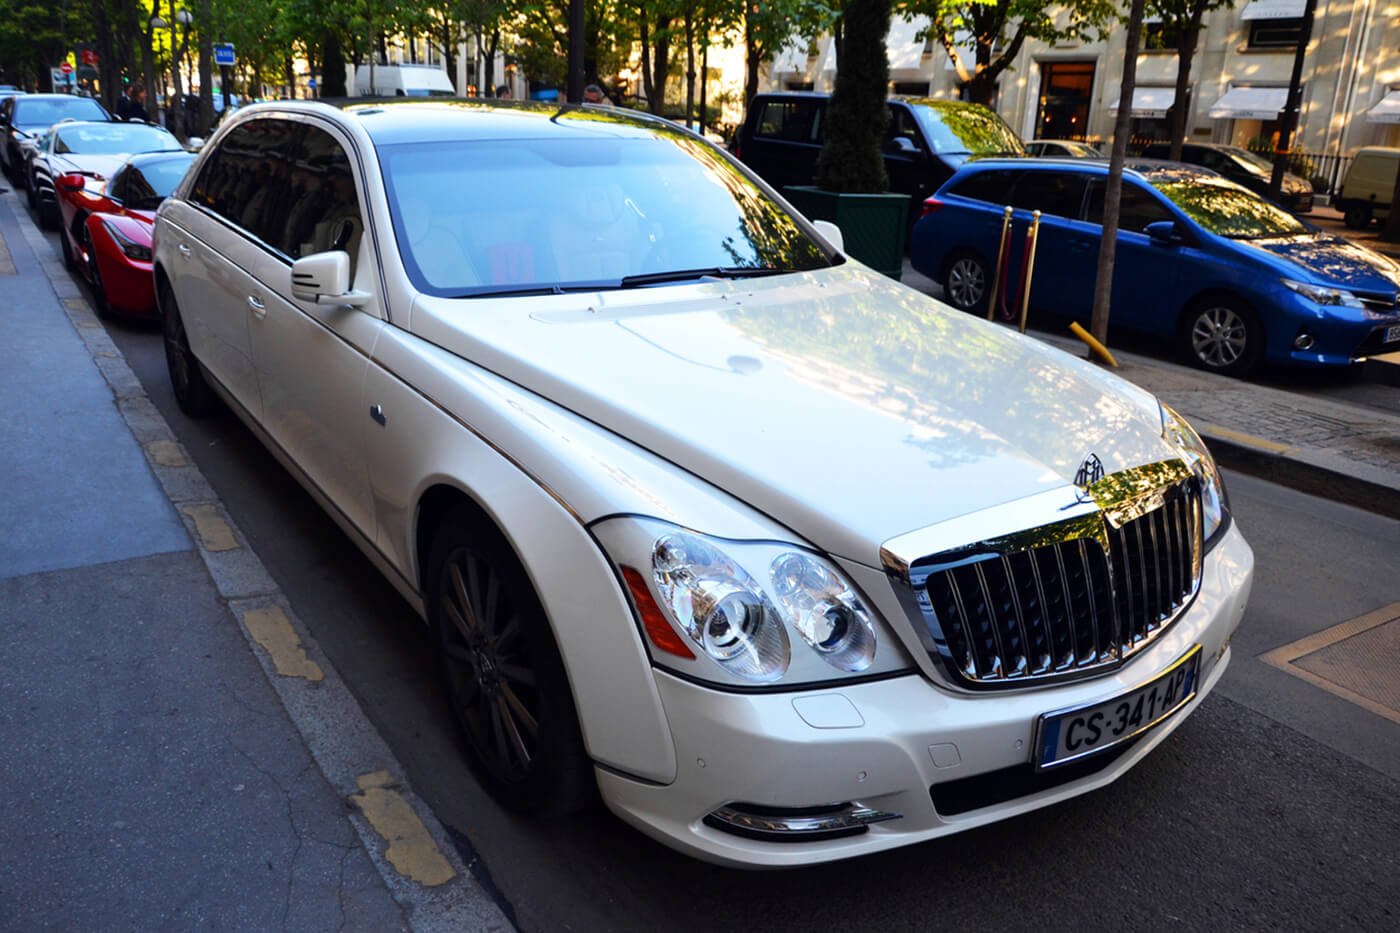 The Maybach: Is it Worth the Investment?